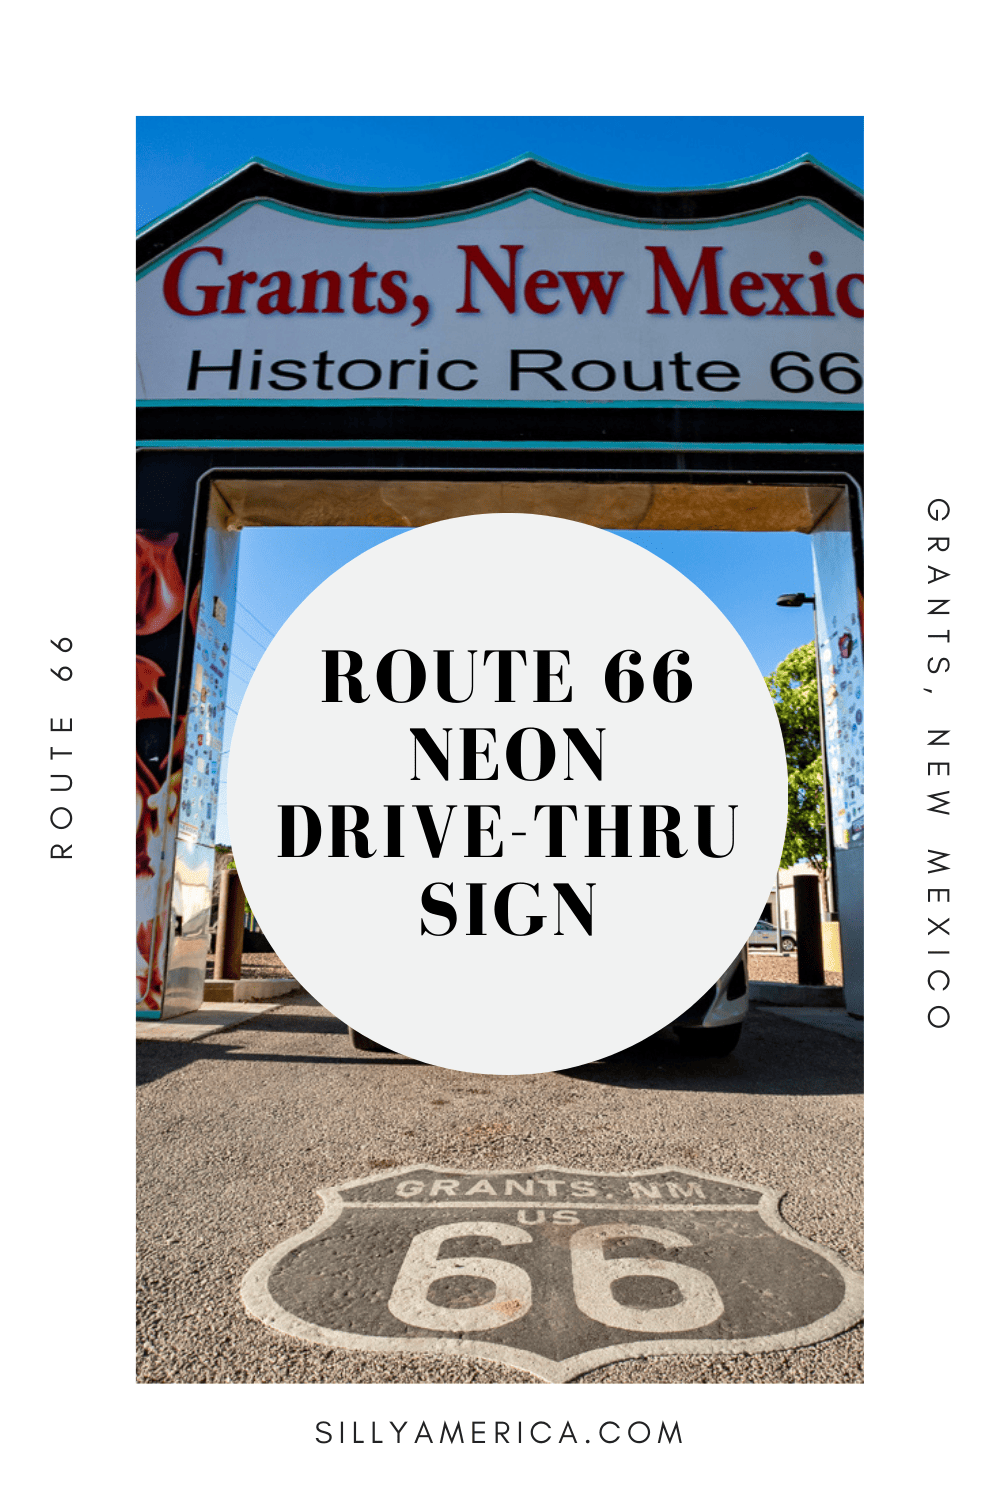 There are plenty of fun photo ops on Route 66: neon lights, oversized roadside attractions, vintage service stations, murals, and shield signs galore. They all make good excuses to hop out of the car and grab some Instagram-worthy photos of your road trip. But how often do you get to stay in your car for that picture-perfect photo op? This Route 66 attraction was made for both you and your car to enjoy: the Route 66 Neon Drive-Thru Sign in Grants, New Mexico. #RoadTrip #Route66 #NewMexico